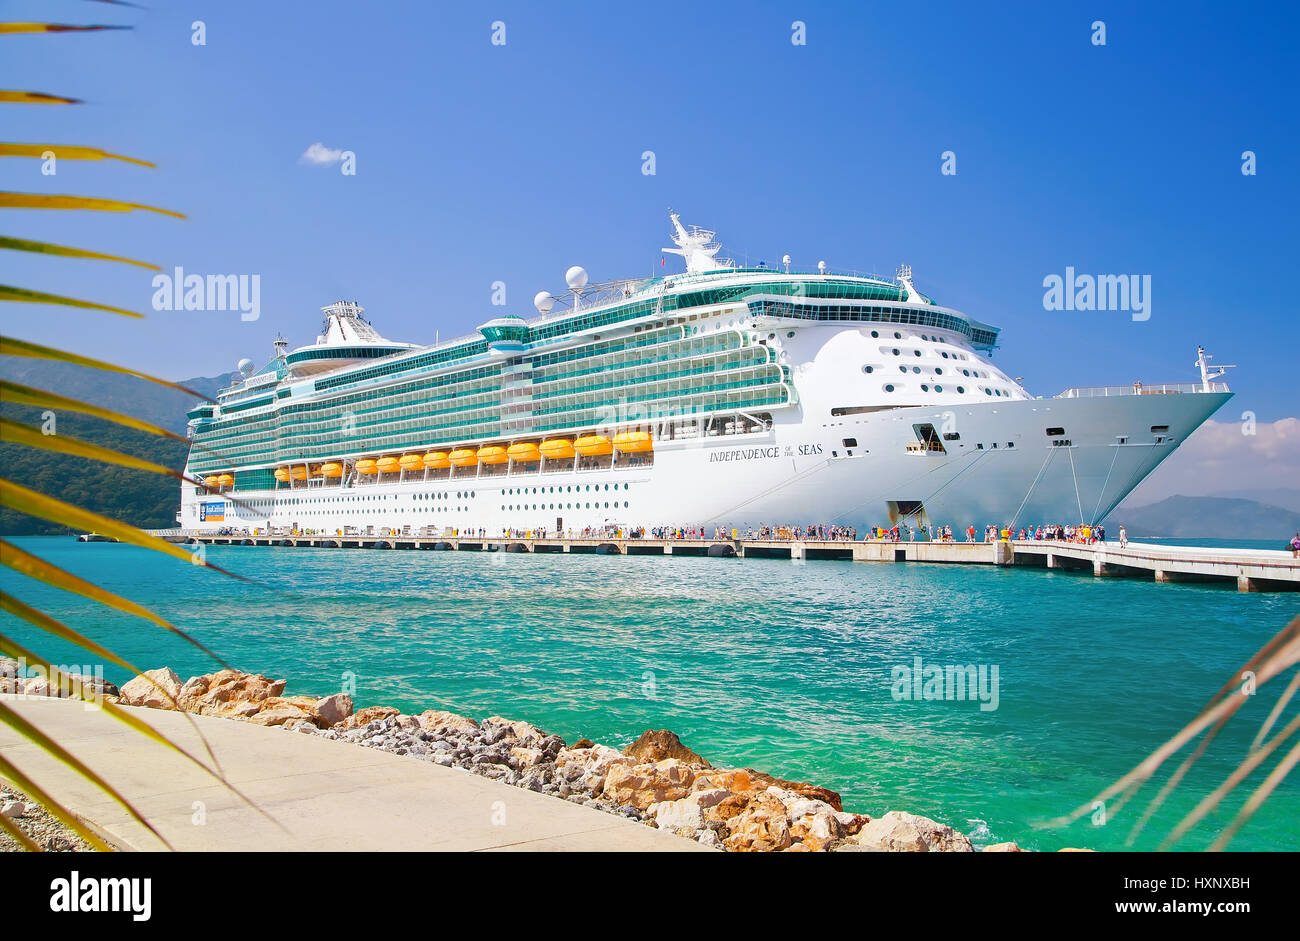 Royal Caribbean cruise ship Independence of the Seas docked at the private port of Labadee in the Caribbean Island Stock Photo